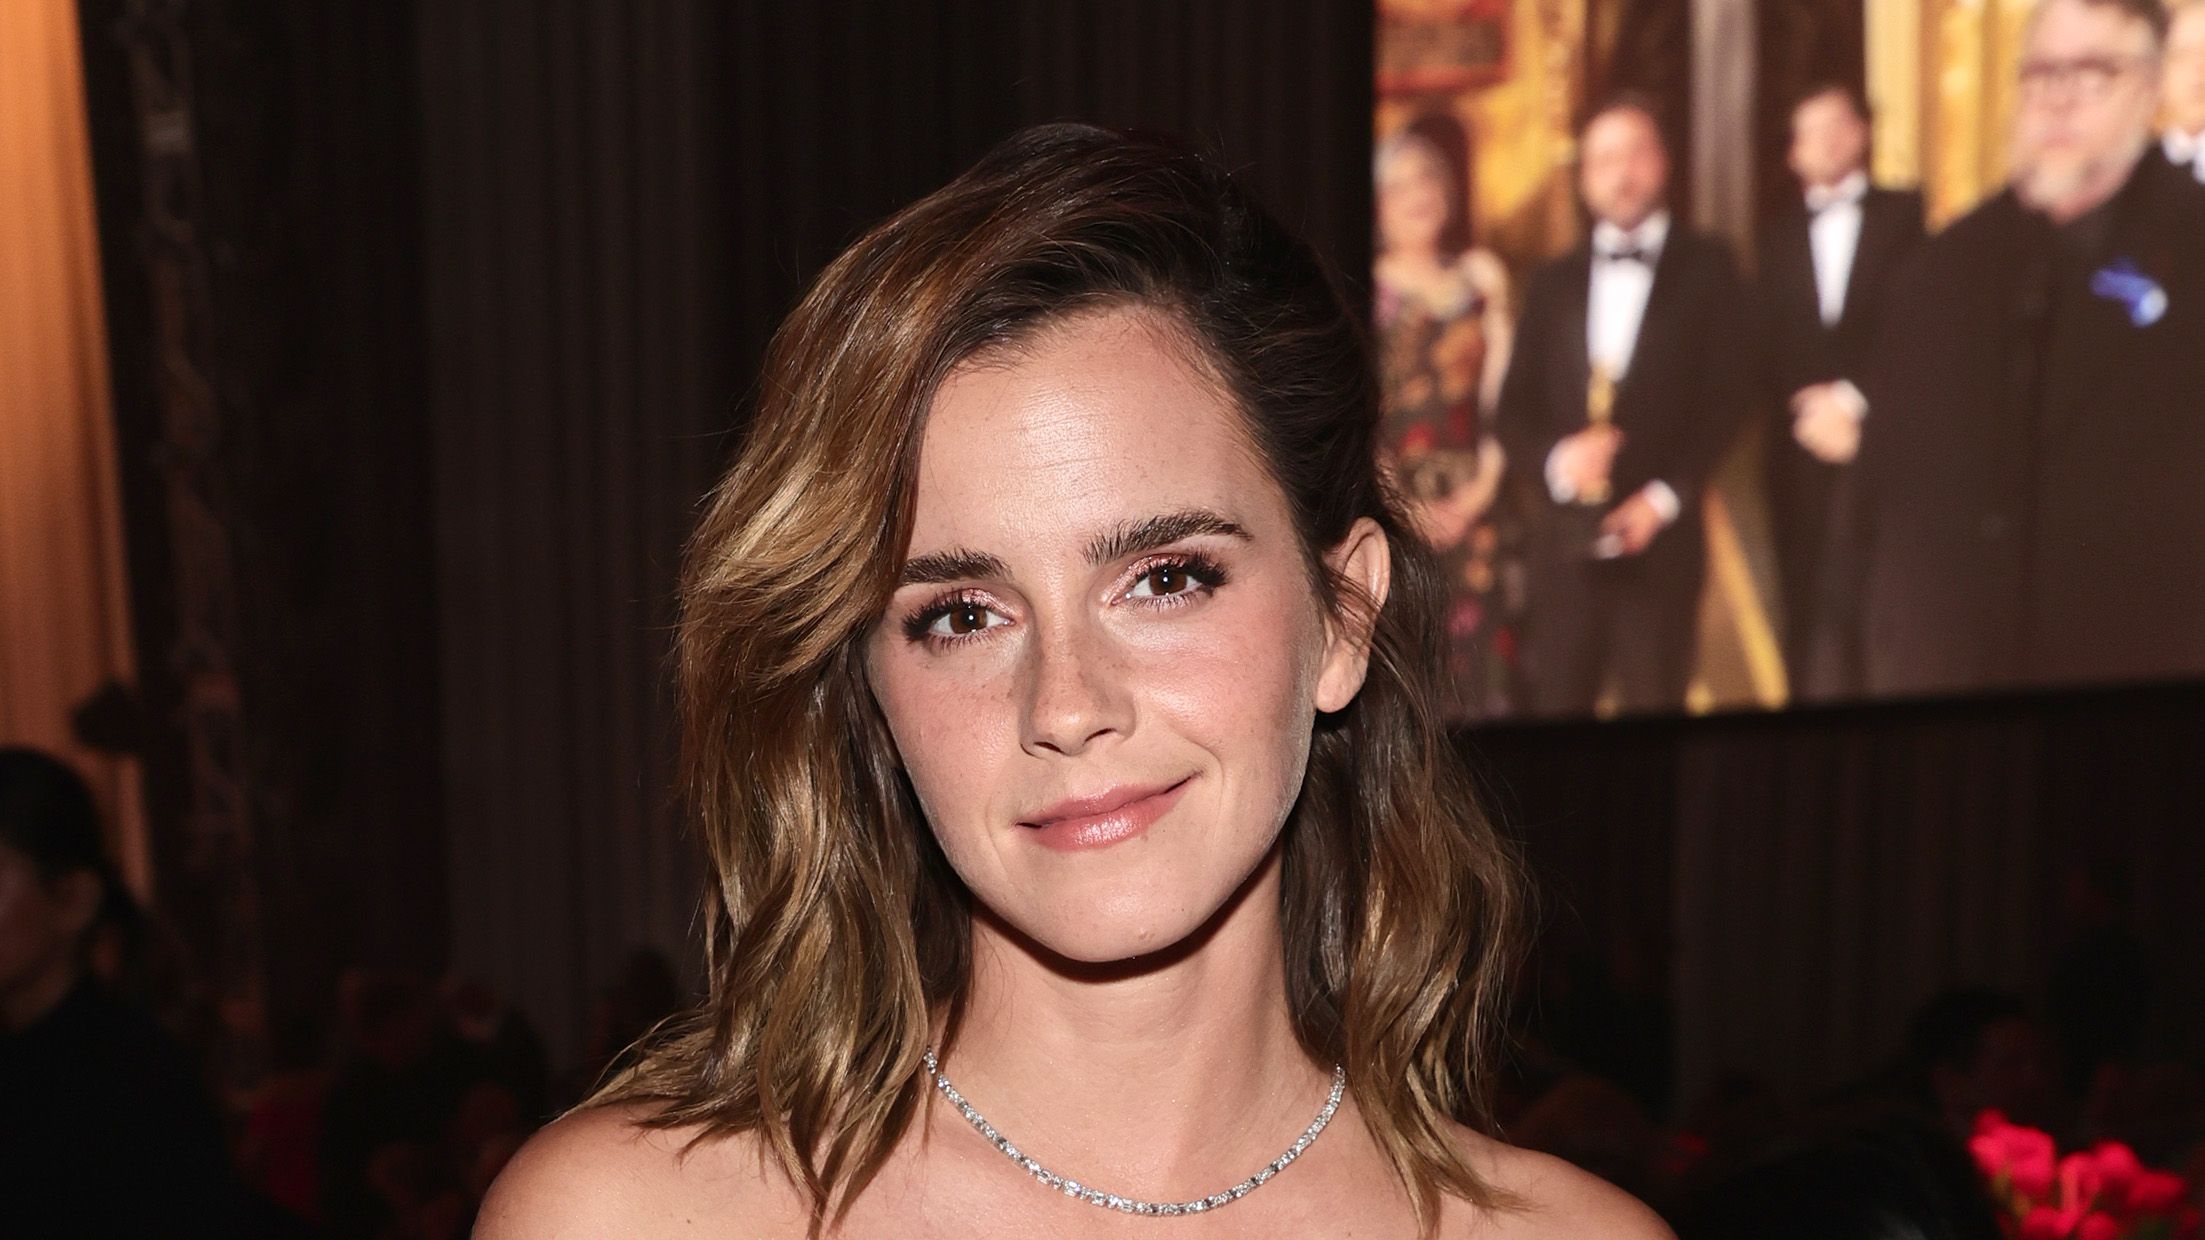 Sexy Emma Watson Porn - Emma Watson Is Toned All Over Rocking A Naked Dress In Oscars Pics